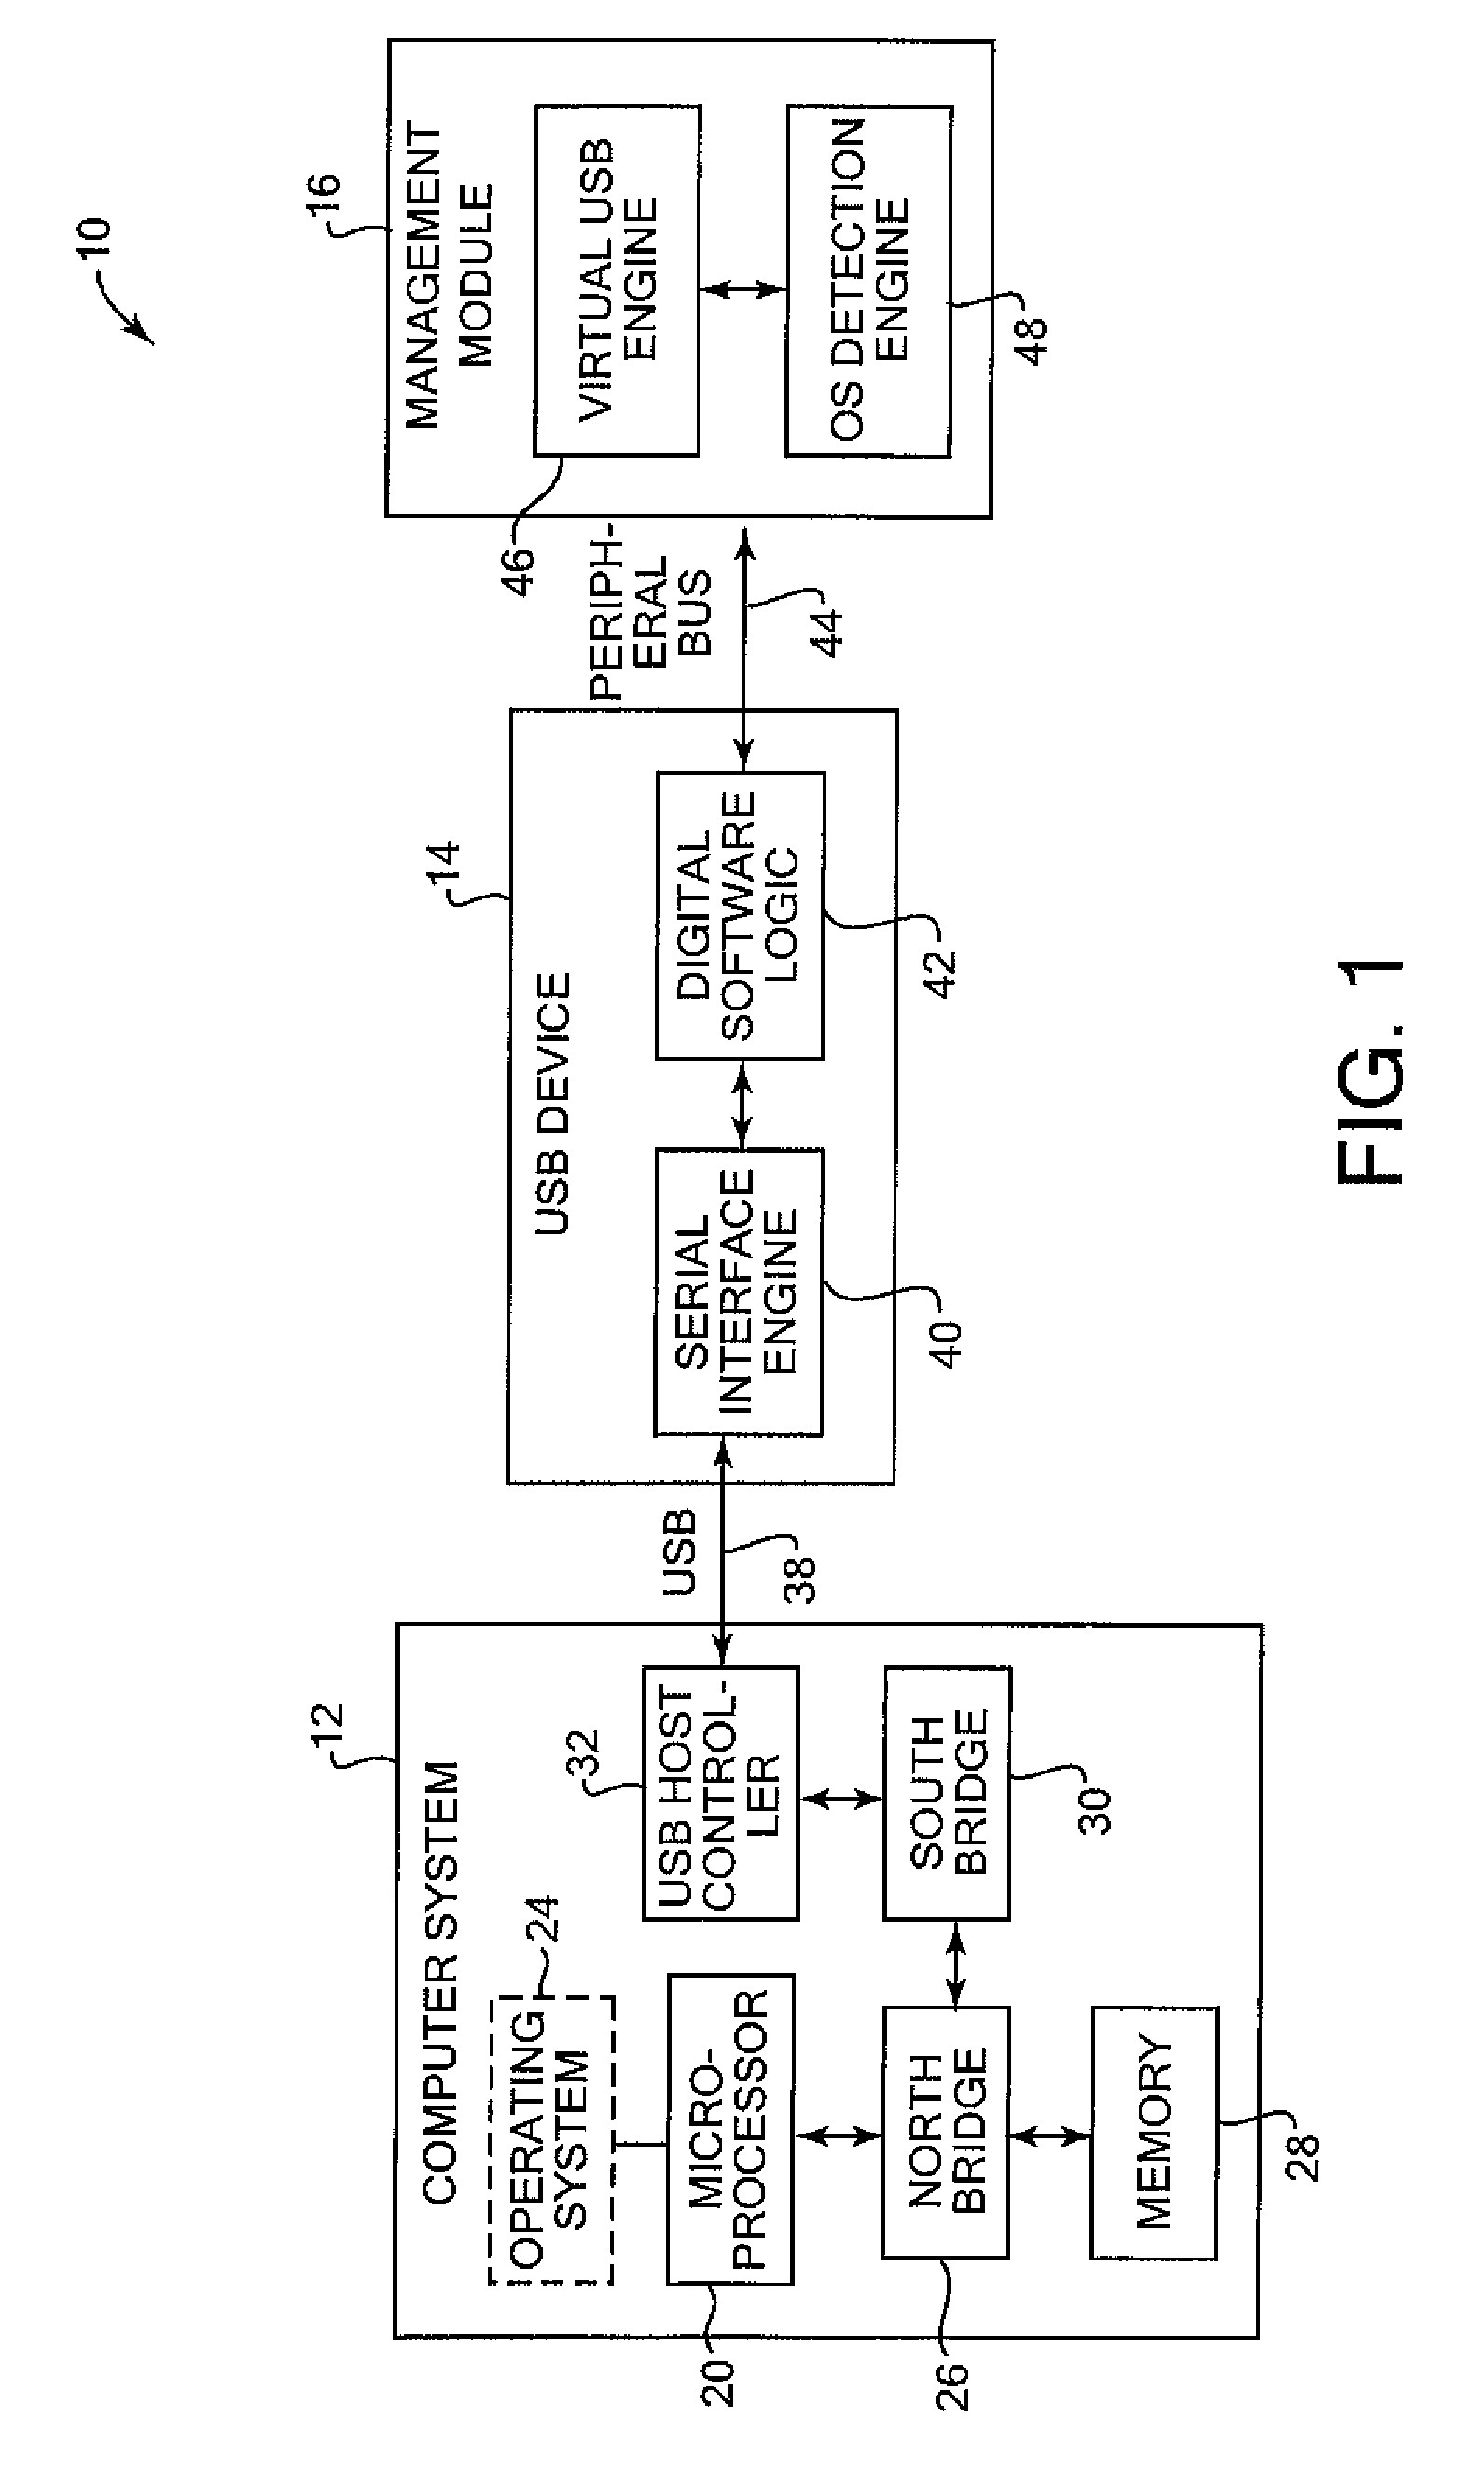 Method and System for Identifying an Operating System Running on a Computer System